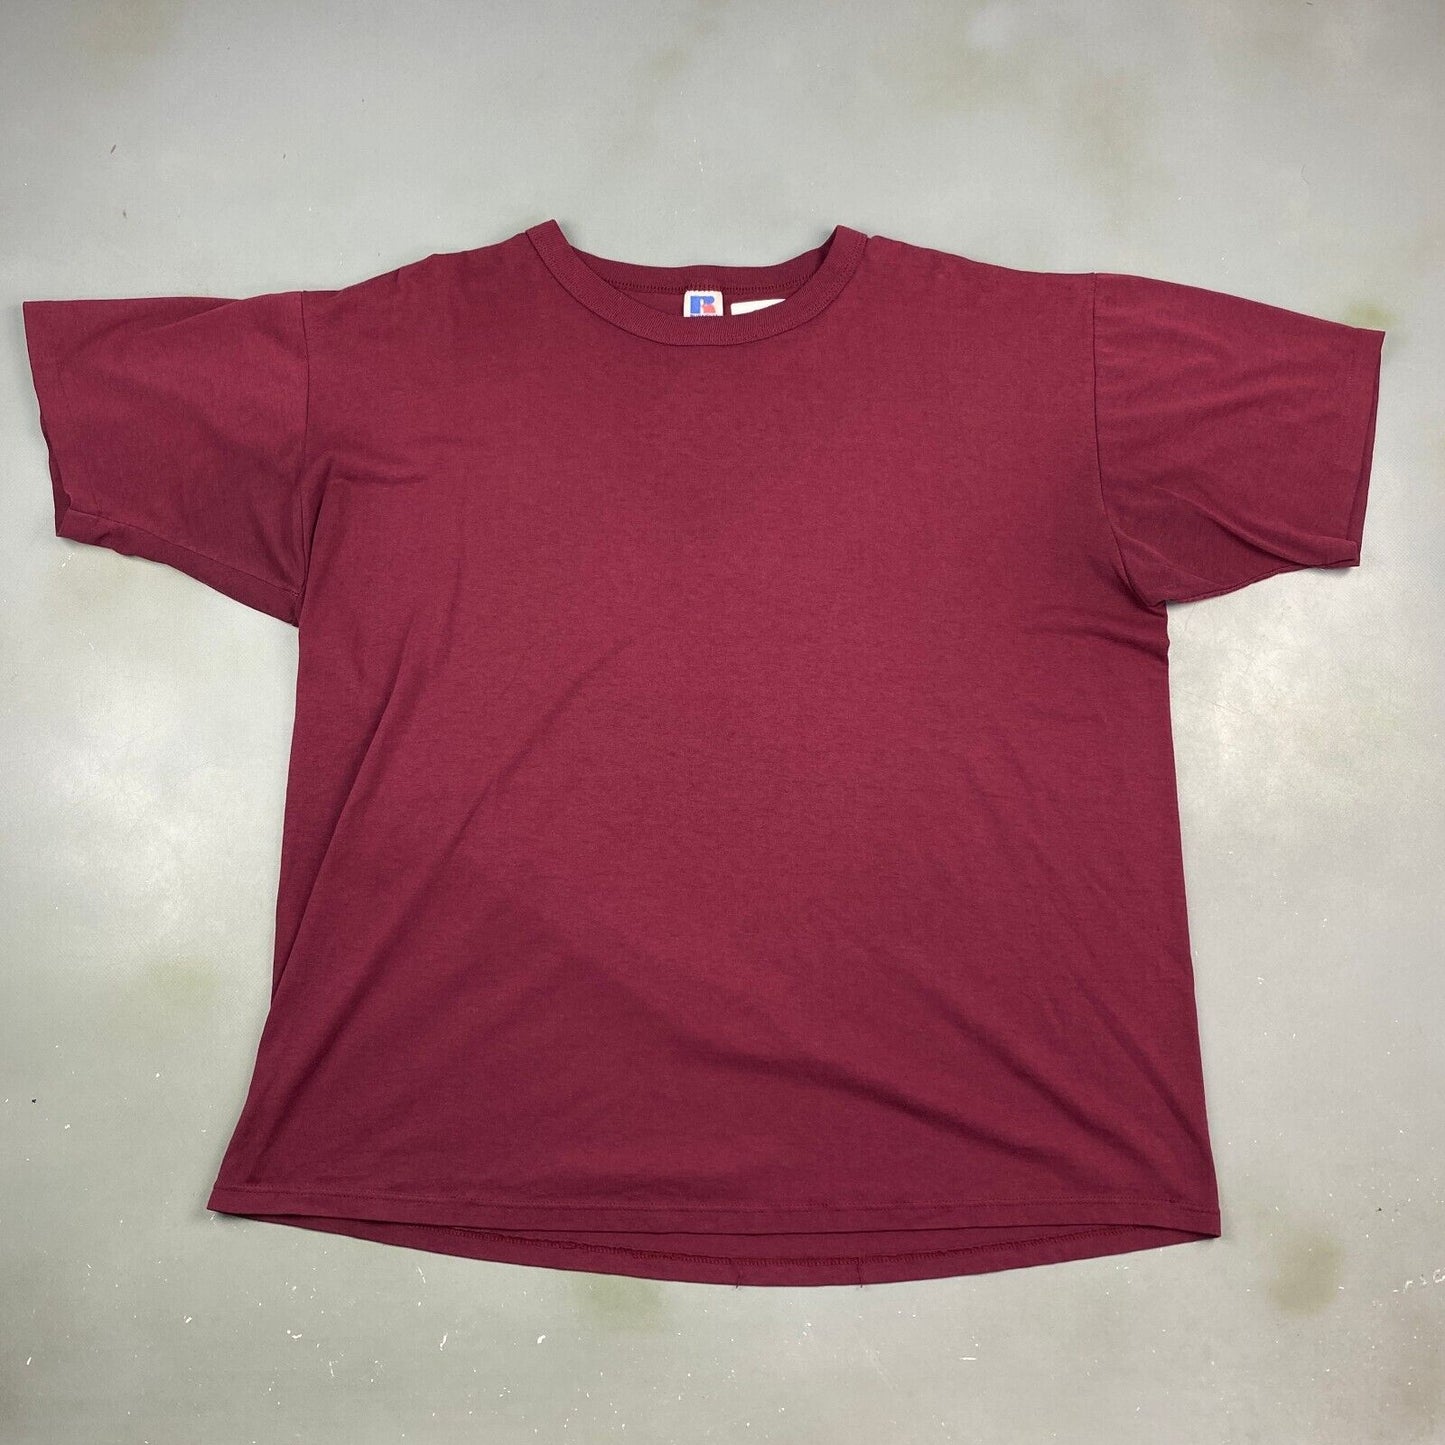 VINTAGE 90s Russell Athletic Faded Maroon Blank T-Shirt MadeinUSA sz XXL Men